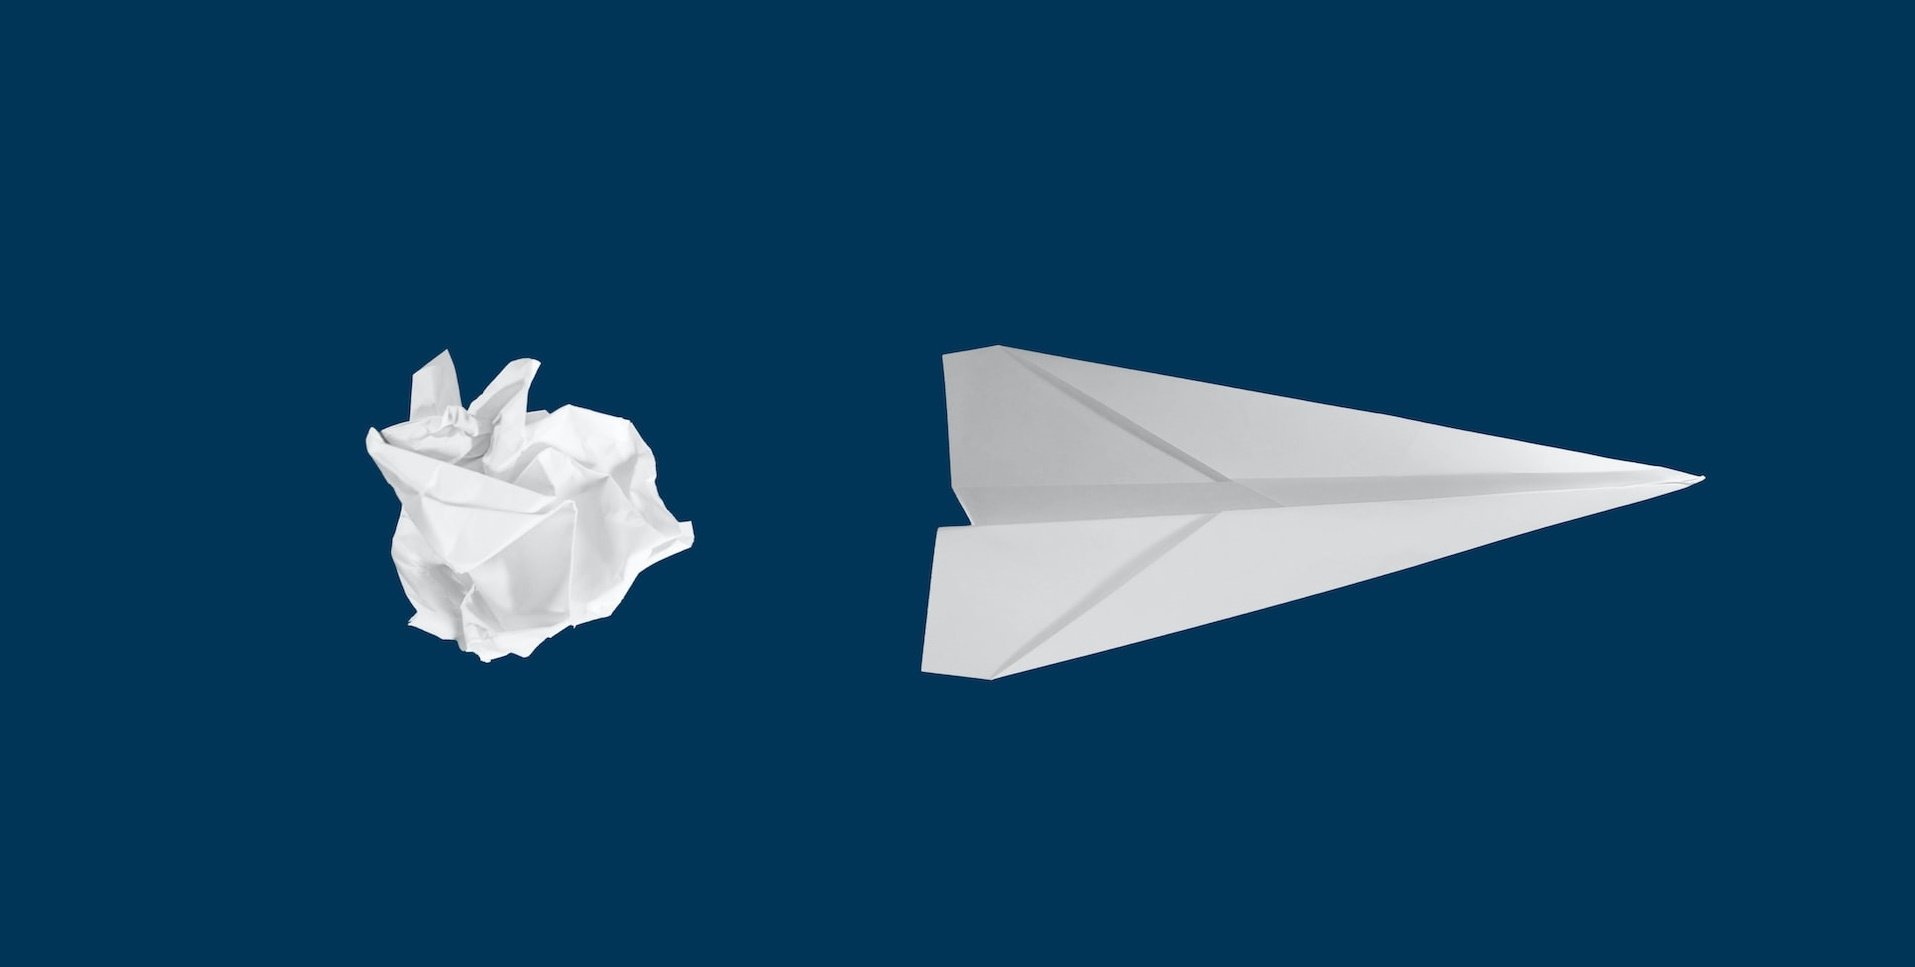 A scrunched up white paper to the left of a pristine white paper plane pointing right, on a blue background